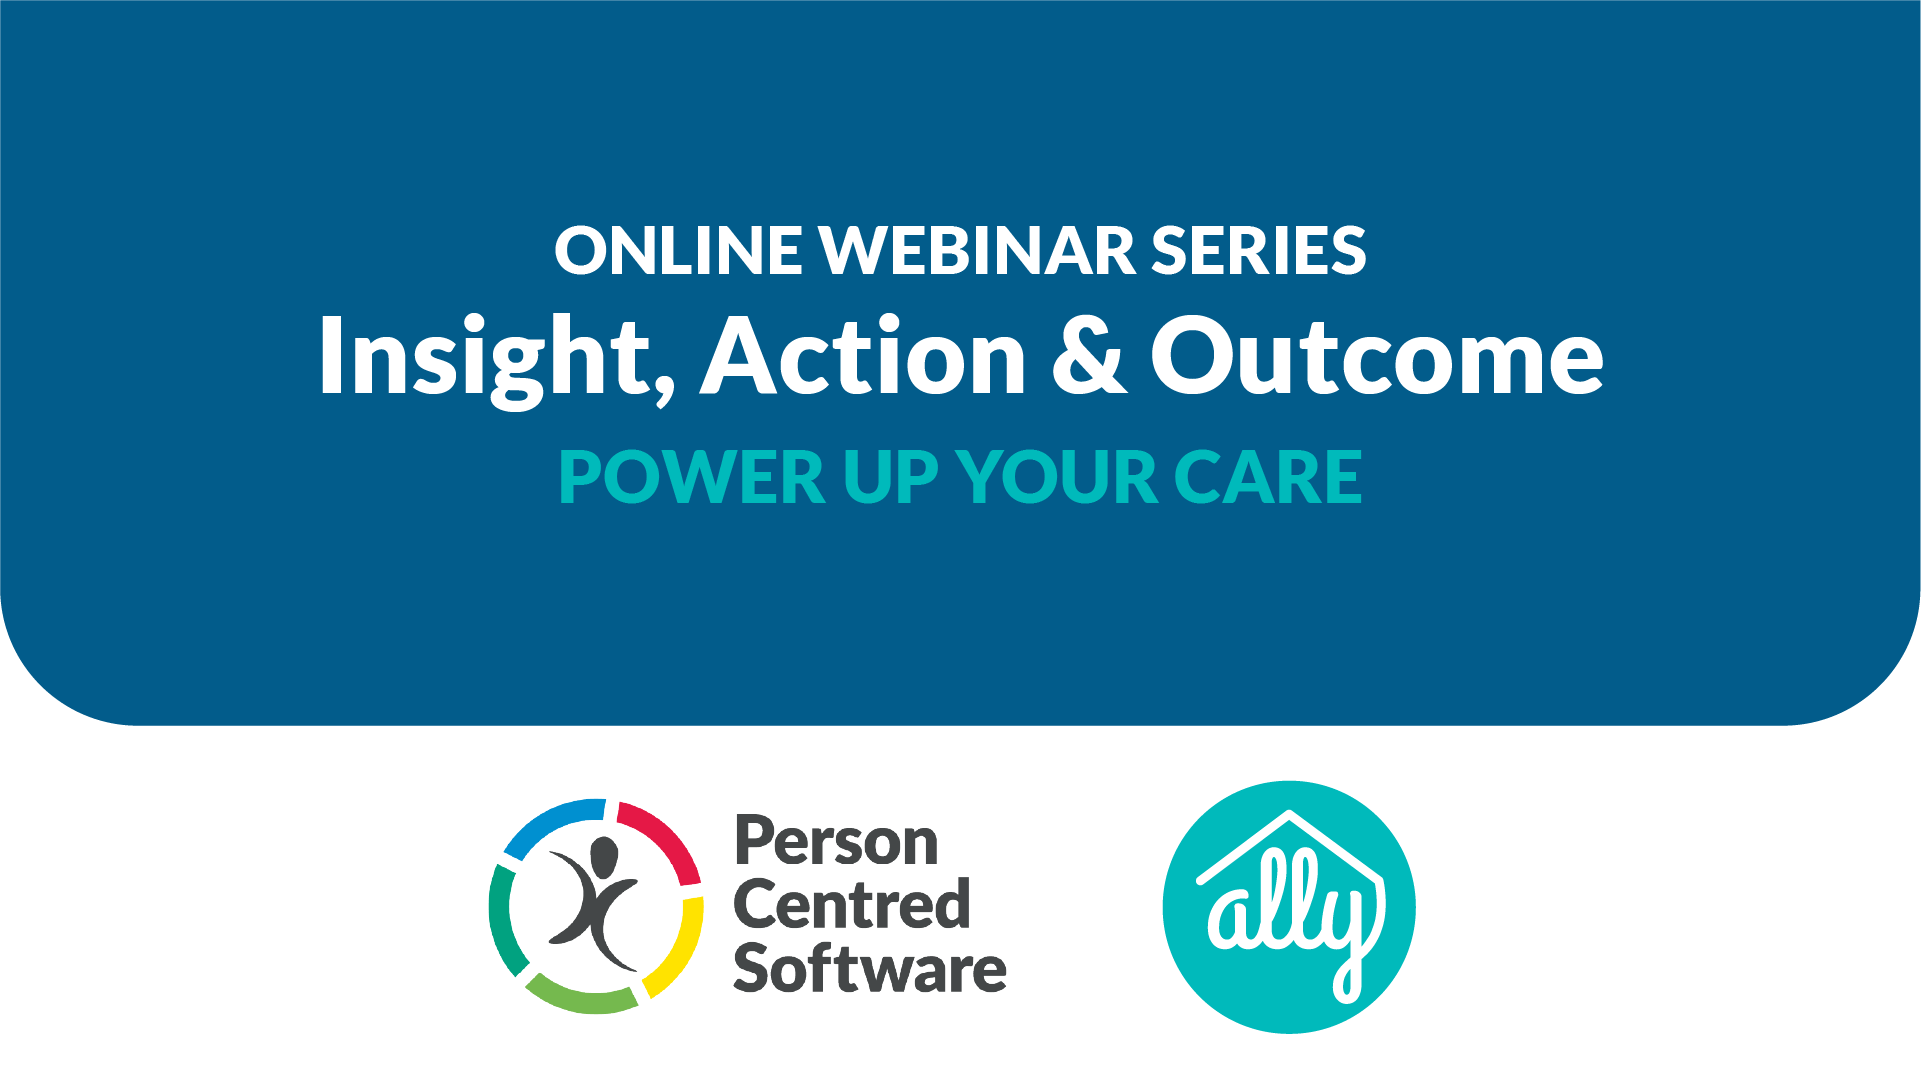 Online Webinar Series - Insights, Actions & Outcome. Power up your care.